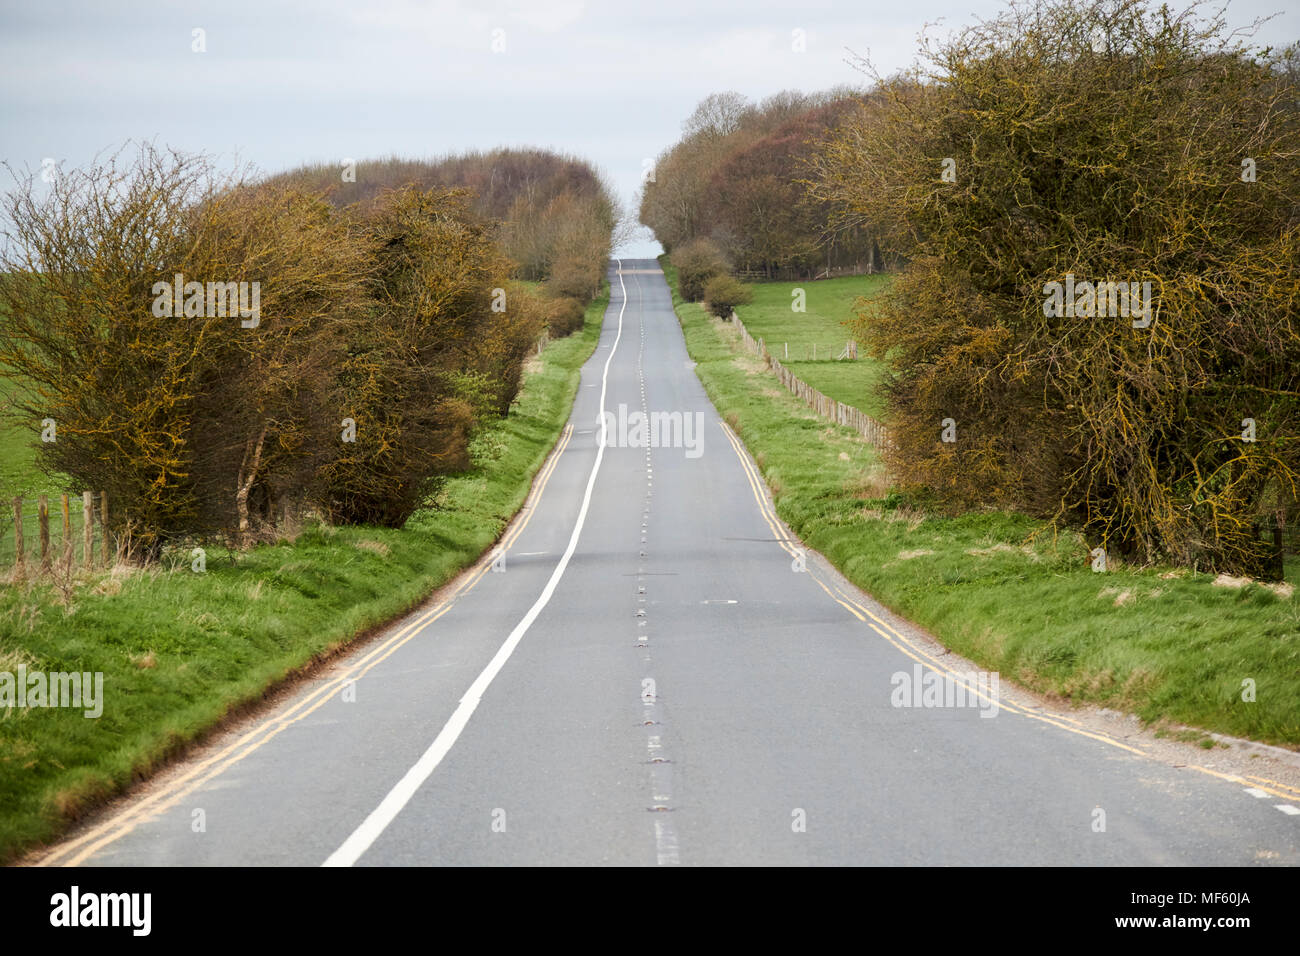 approach road between stonehenge visitors centre and the stones at Stonehenge wiltshire england uk Stock Photo